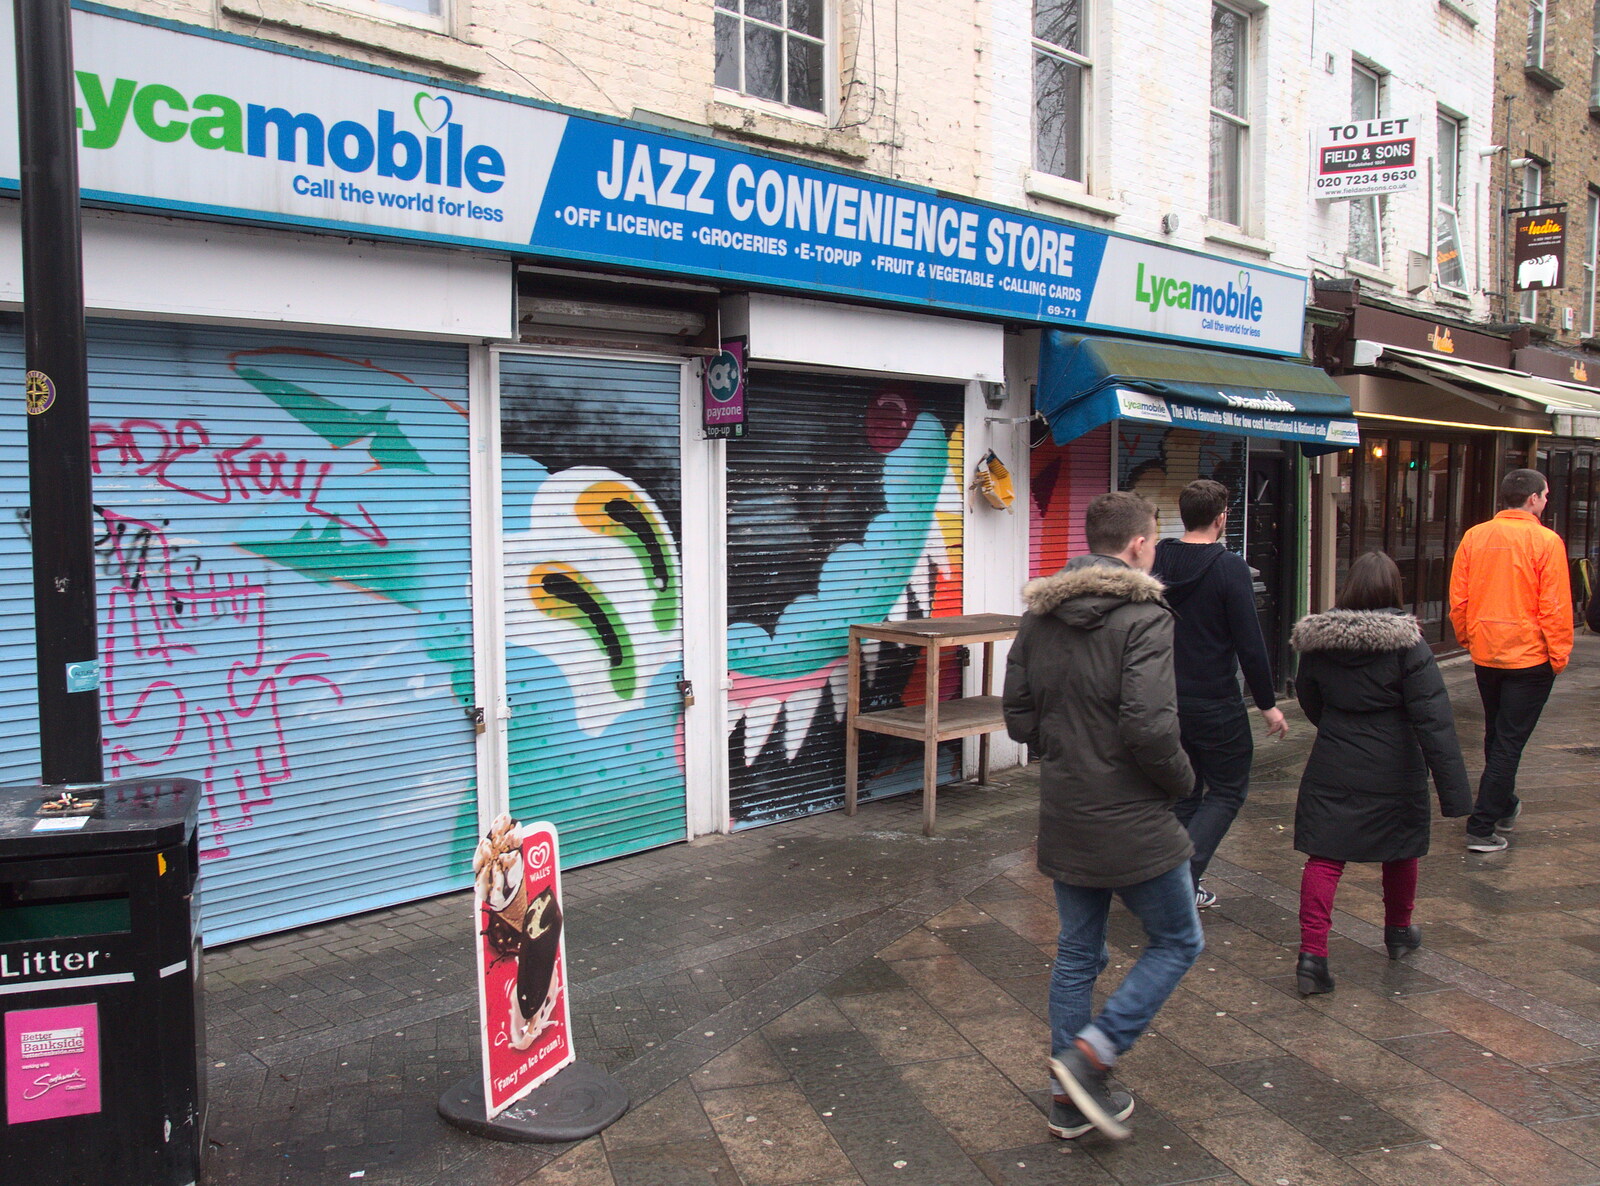 The closed-down Jazz convenience store from A London Lunch, Borough, Southwark - 15th December 2015